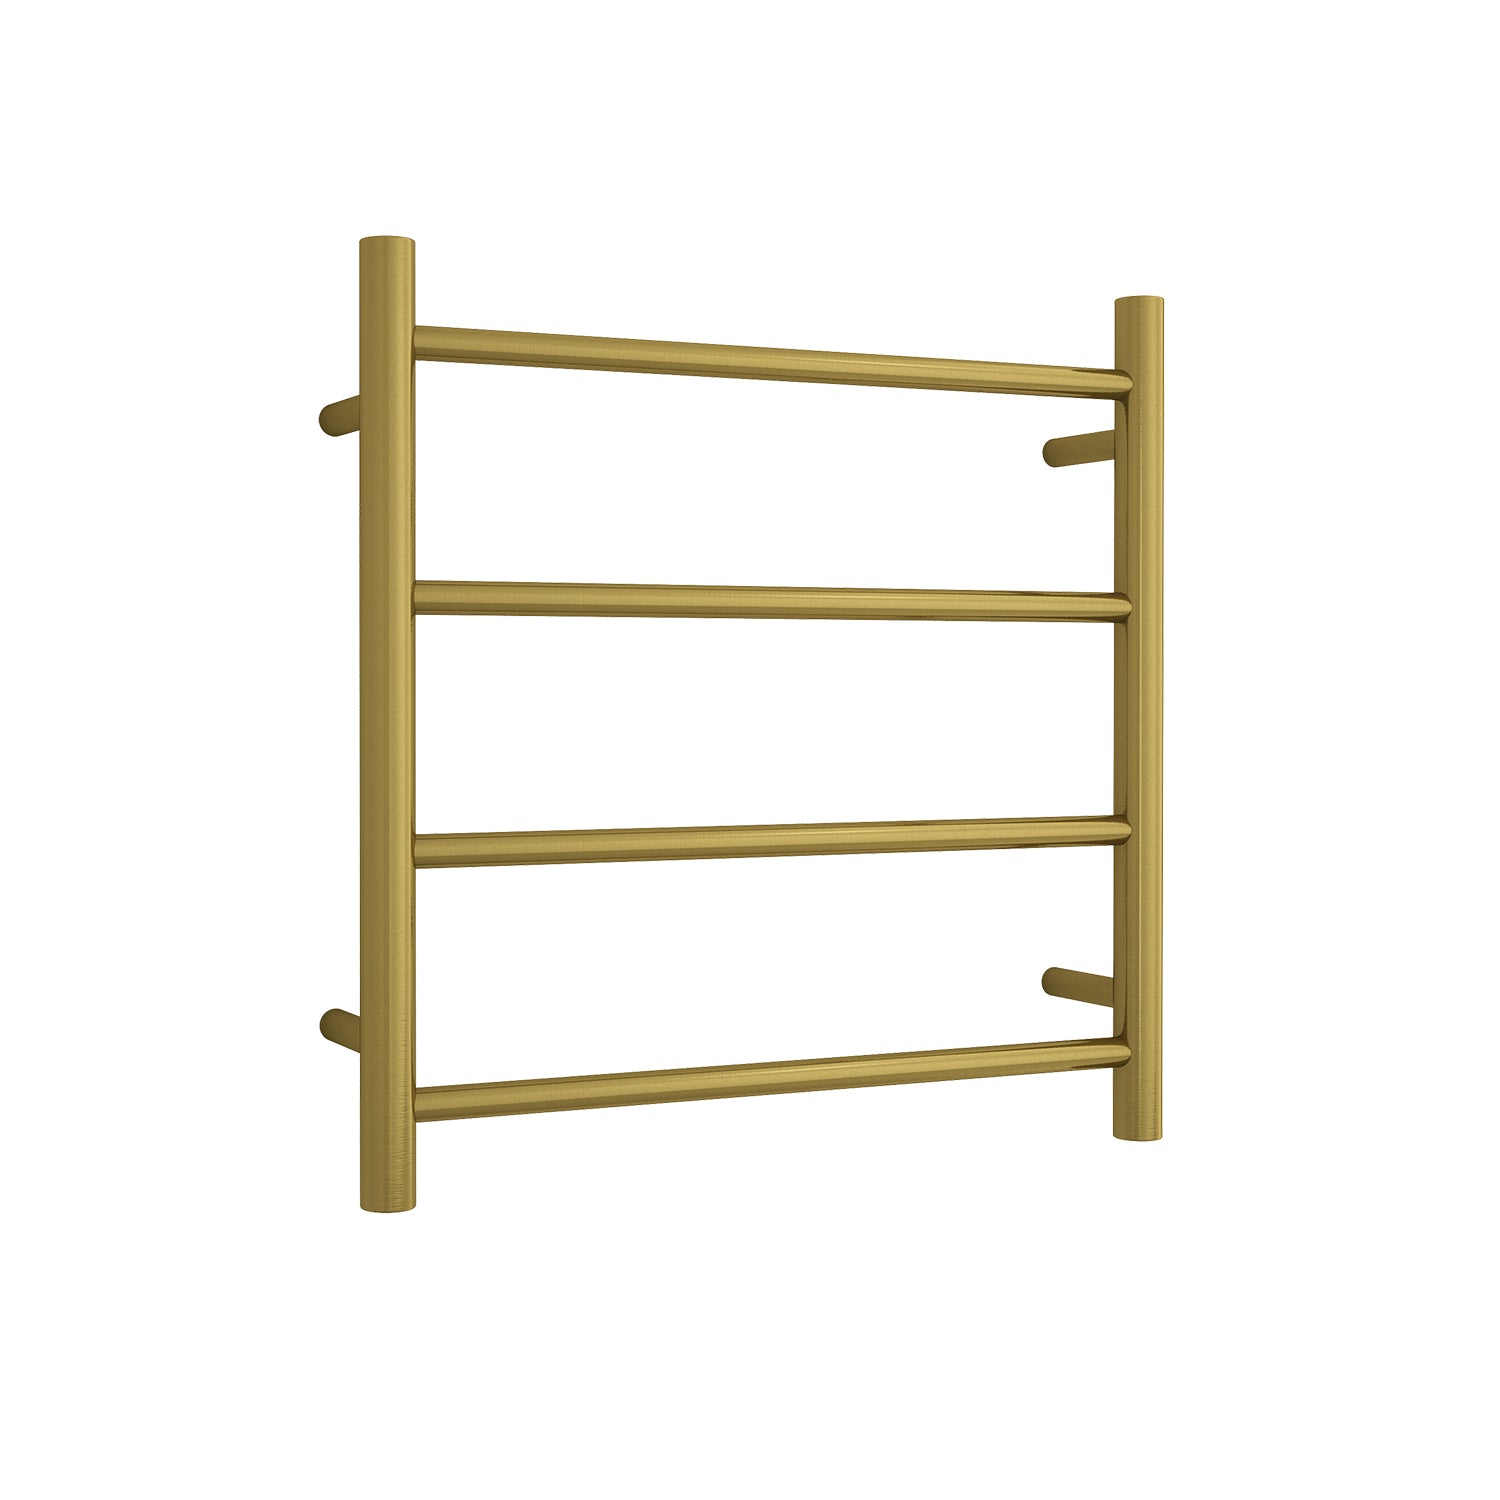 THERMOGROUP ROUND LADDER HEATED TOWEL RAIL BRUSHED GOLD 550MM